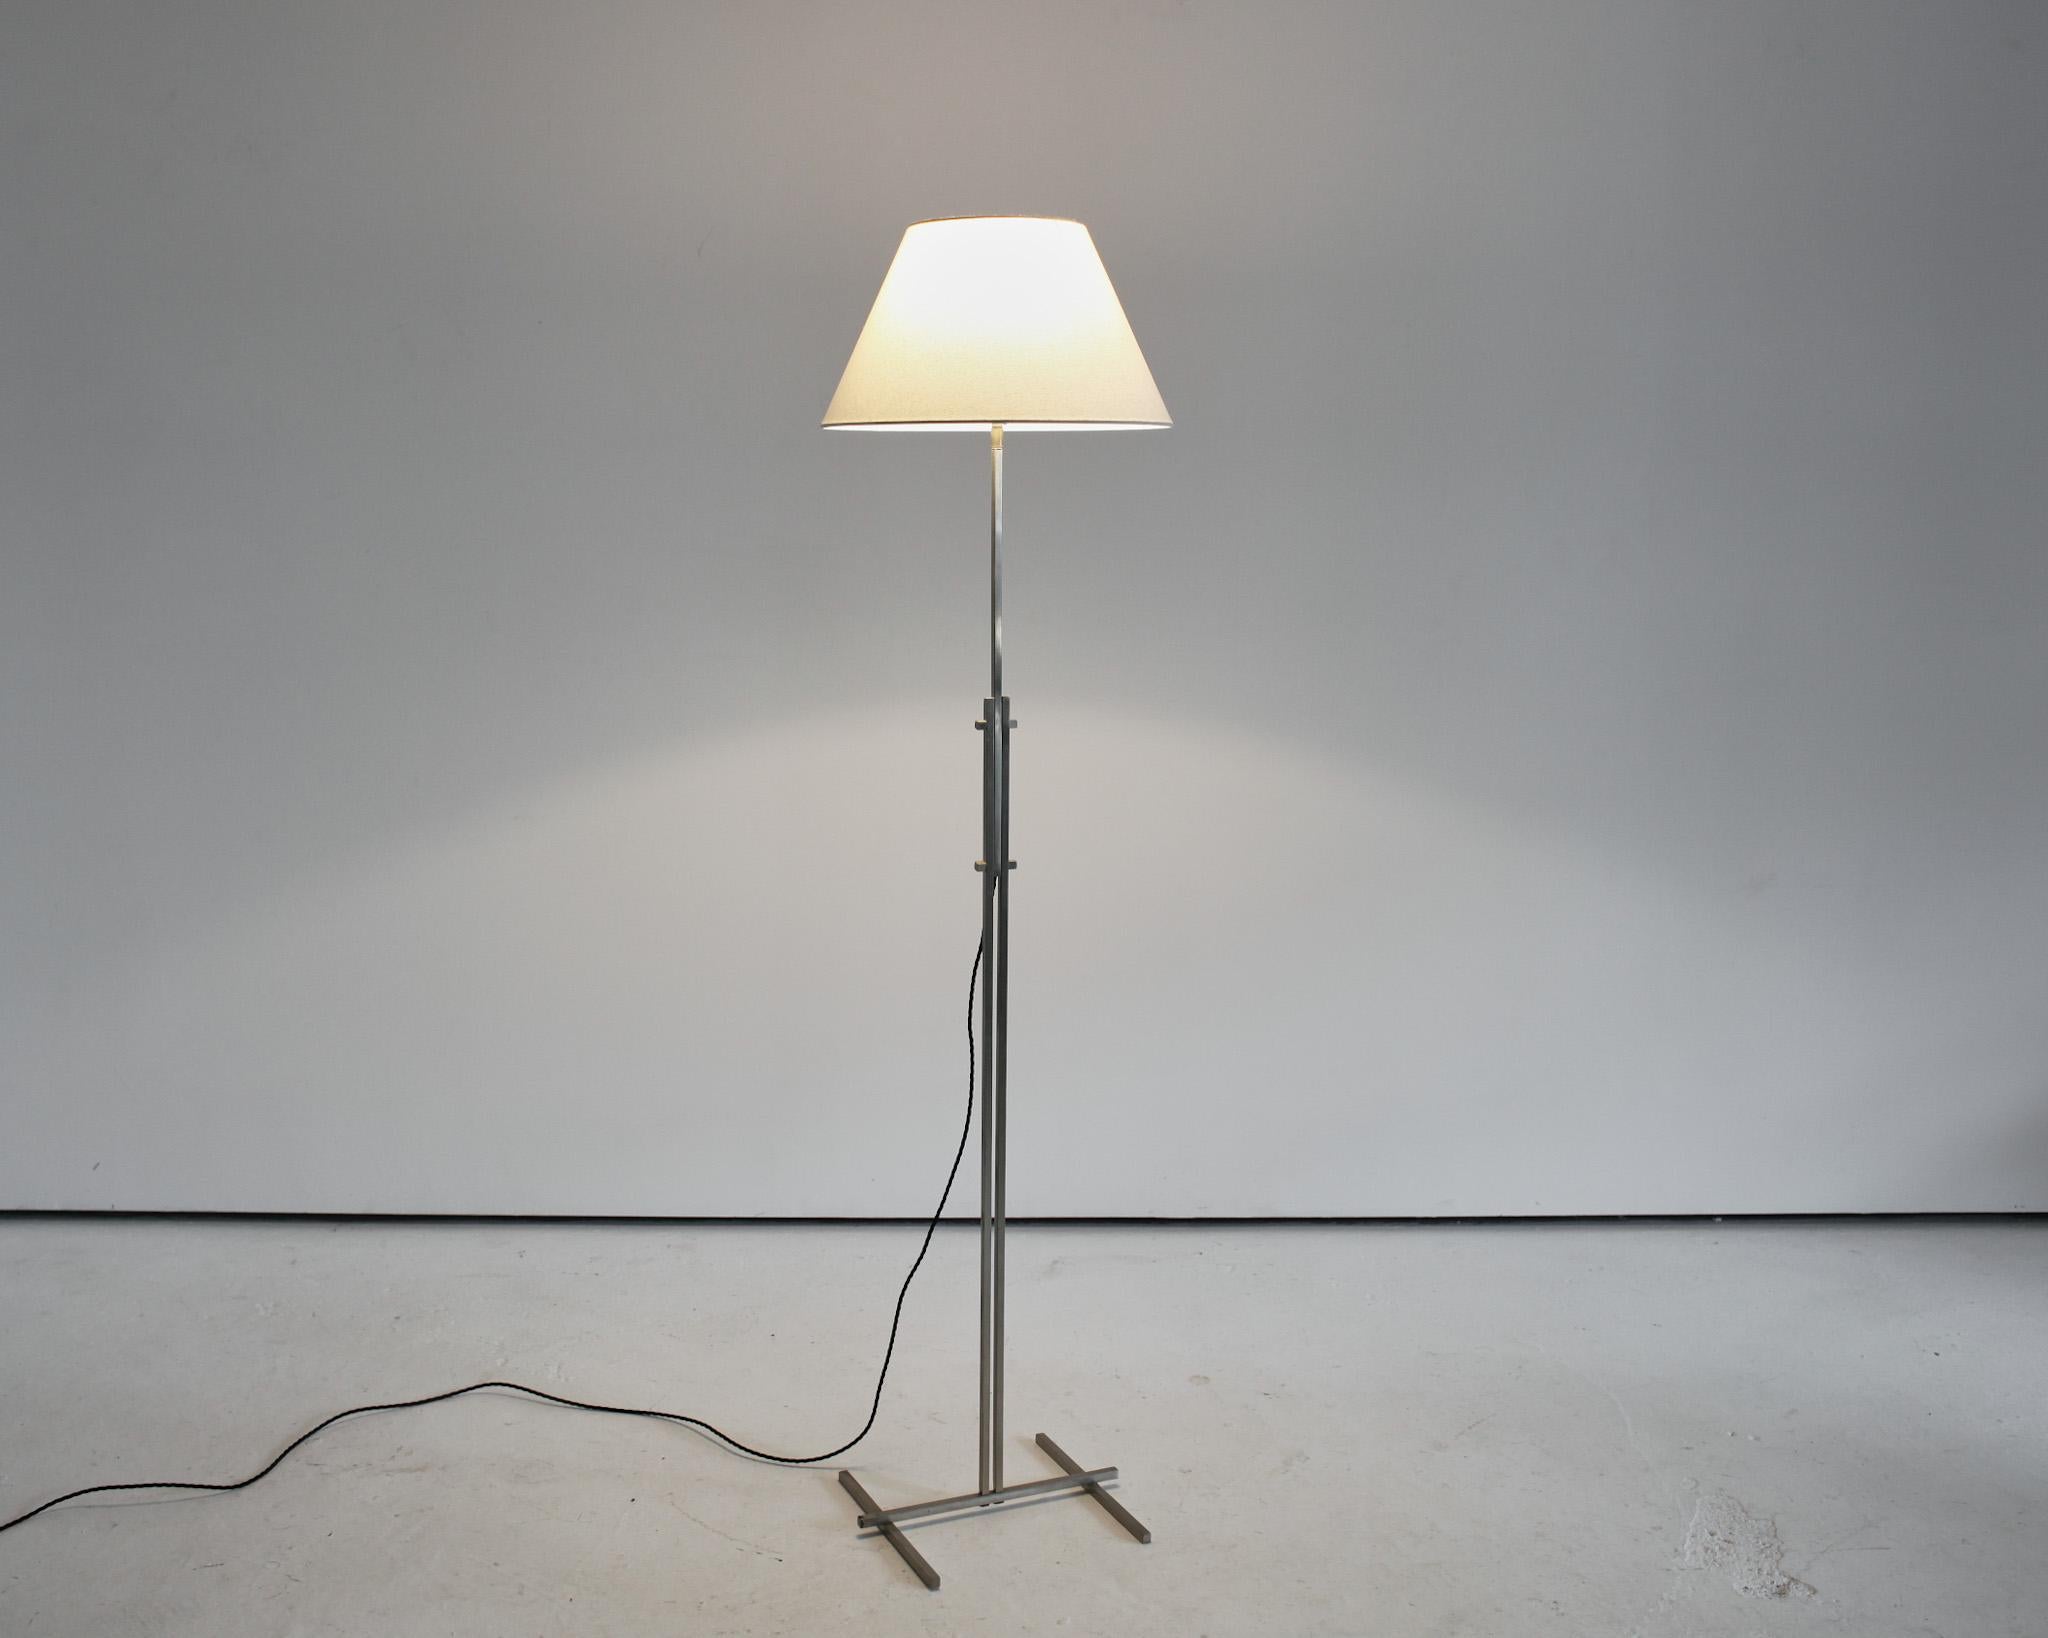 A 1970s Italian nickel standard lamp stylistically reminiscent of the earlier works of the Bauhaus school.

Lightly patinated with some minor fading/loss to the nickel plating.

Professionally re-wired.

Photographed with off white linen